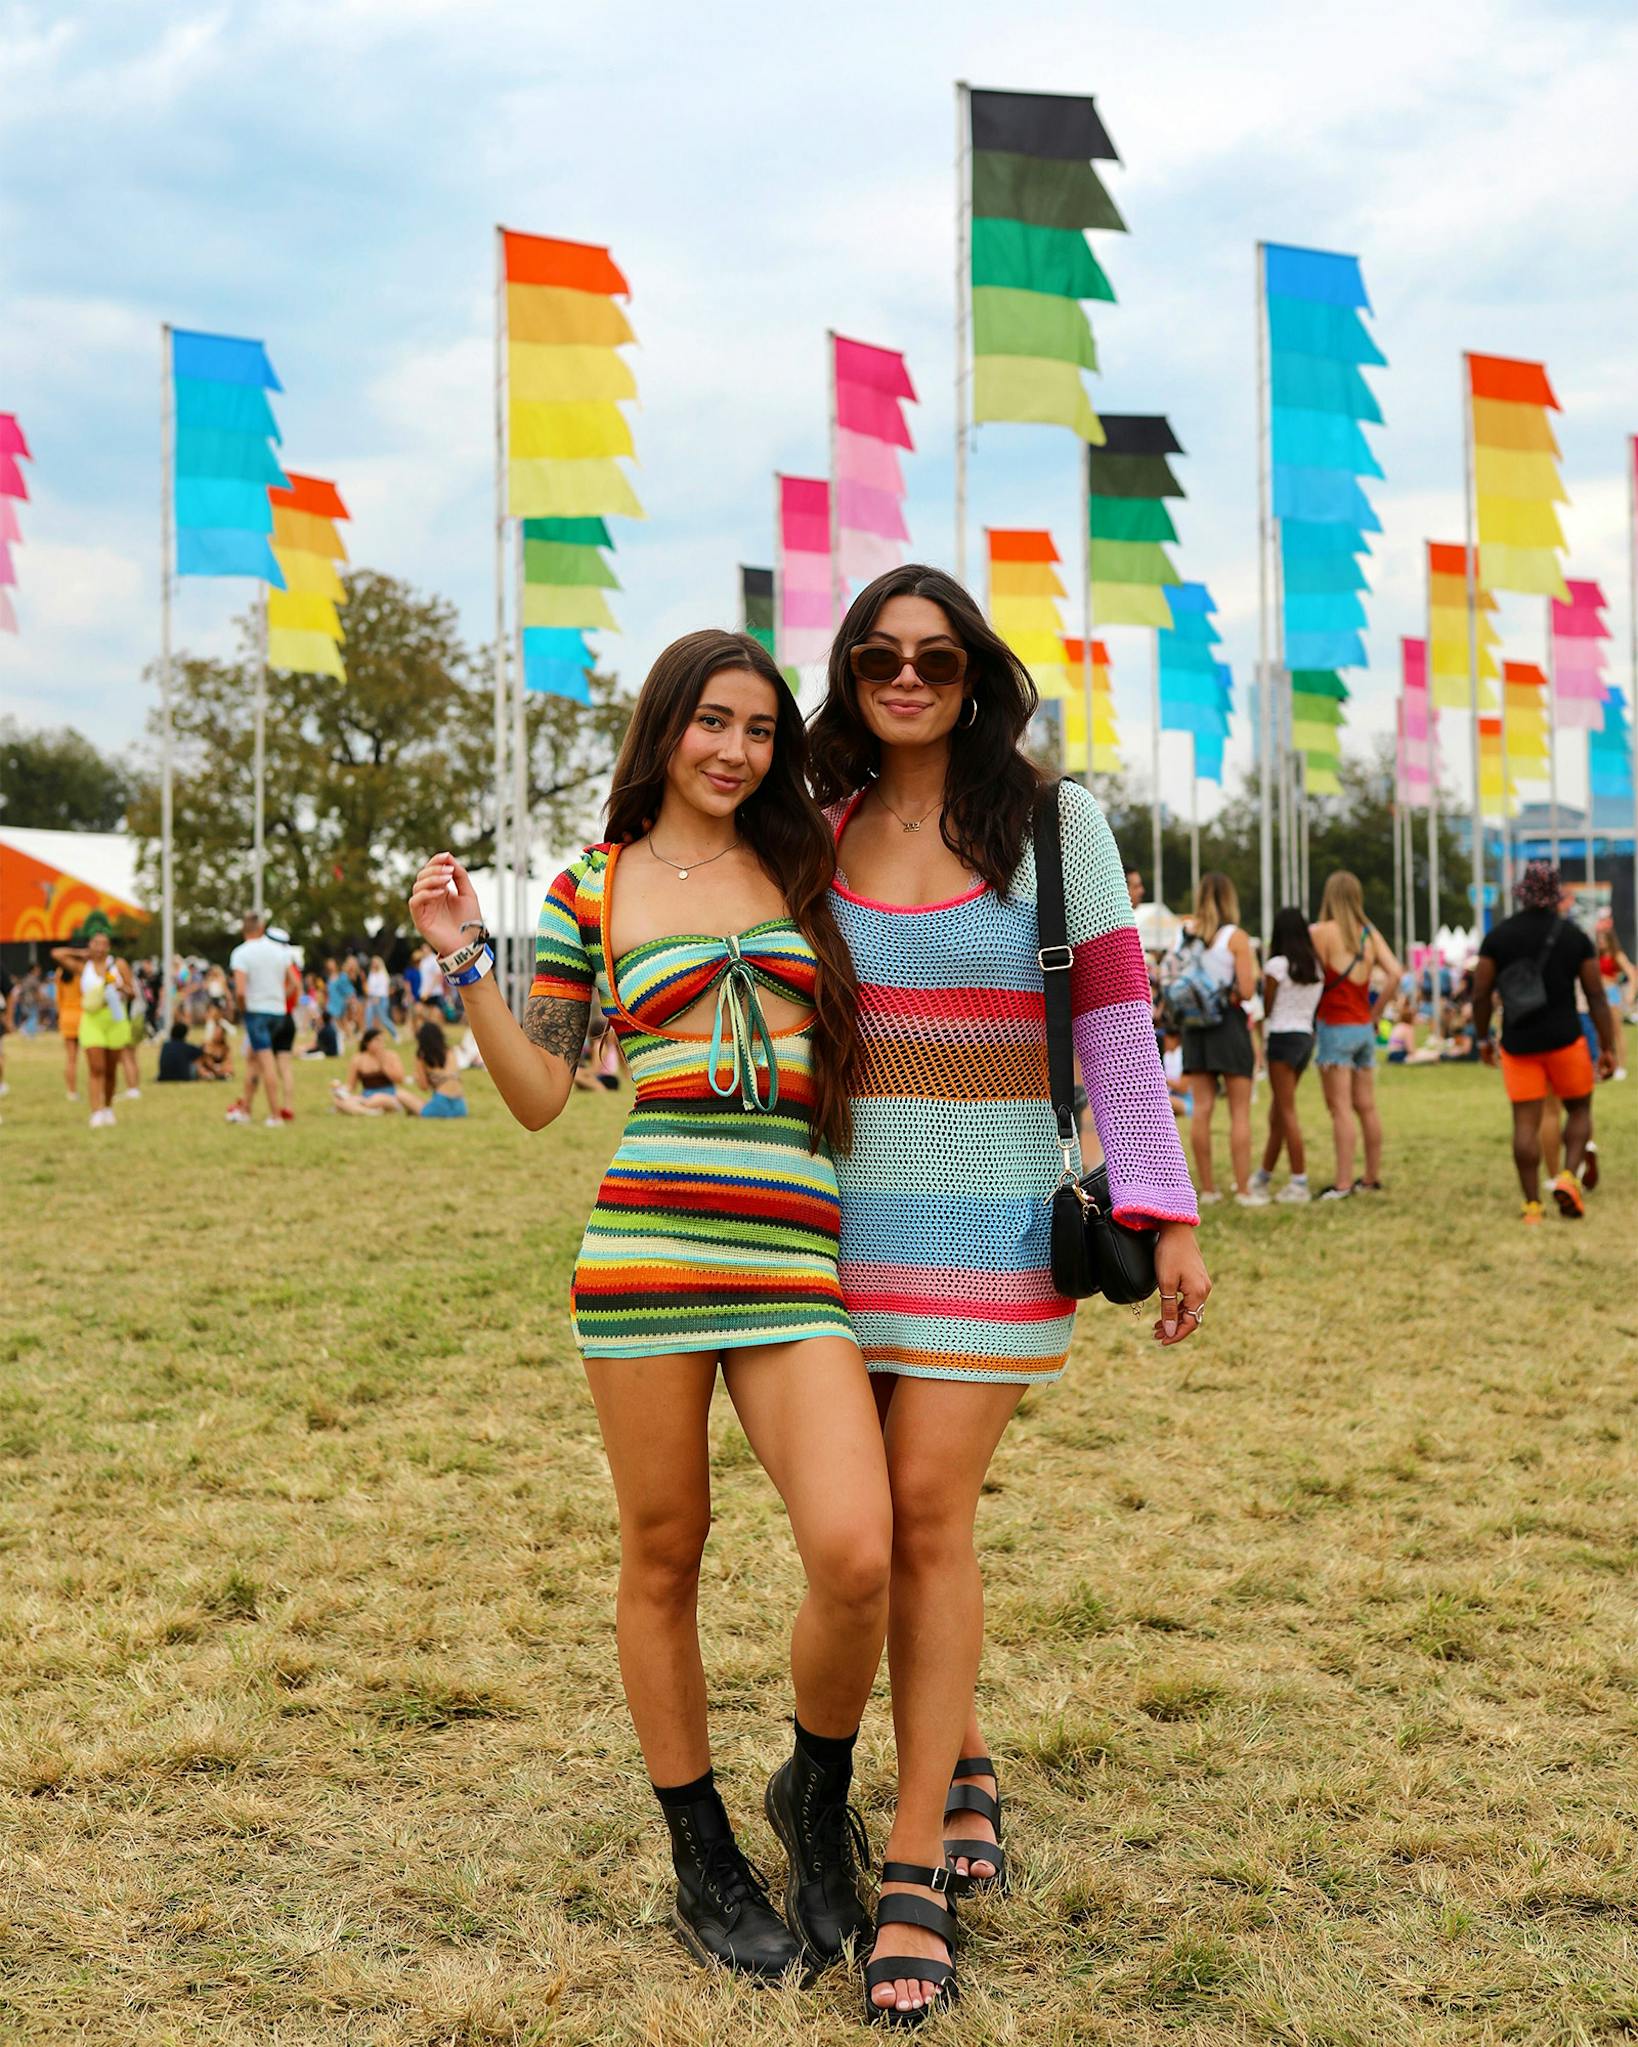 Photos: What To Wear To ACL Fest; The Fashion We're Seeing This